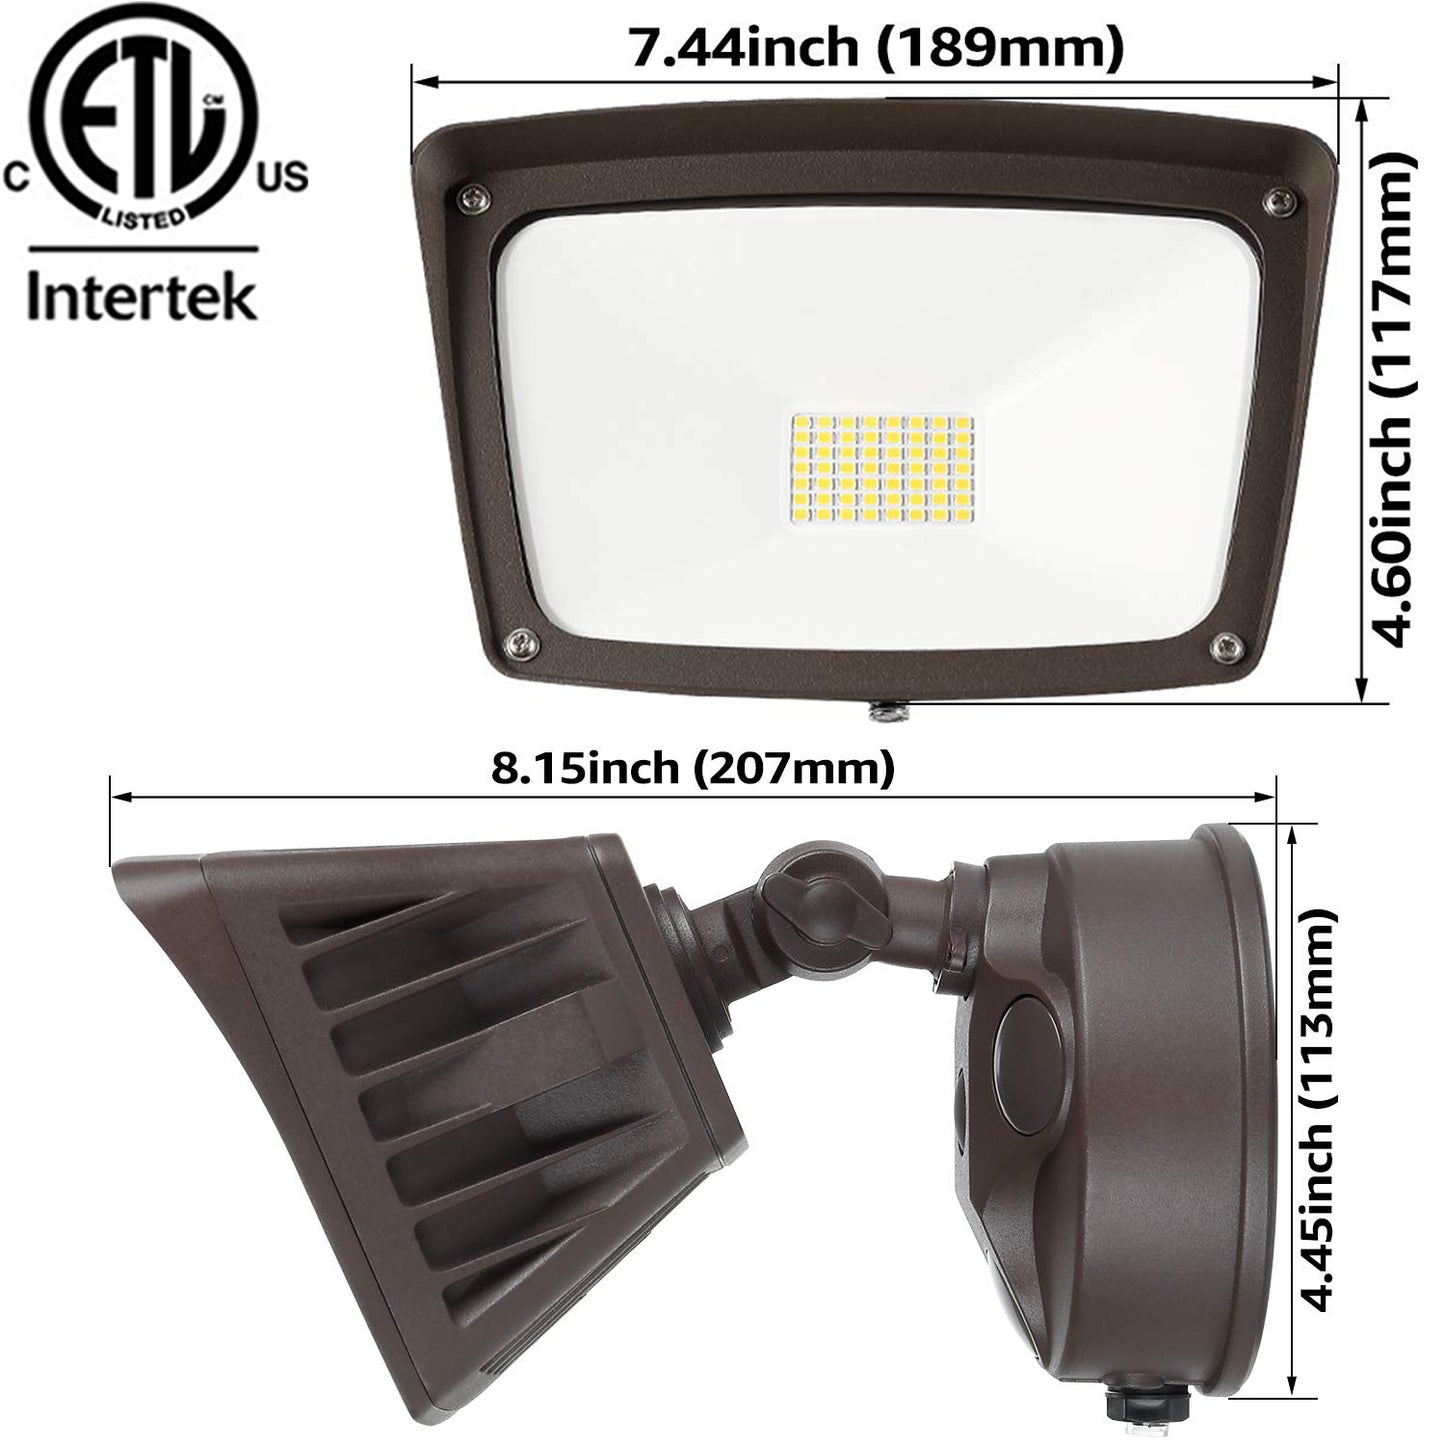 Exterior Light Fixtures, Canada 40w 6000k 4800Lm Led Photocell Dusk to Dawn Yard